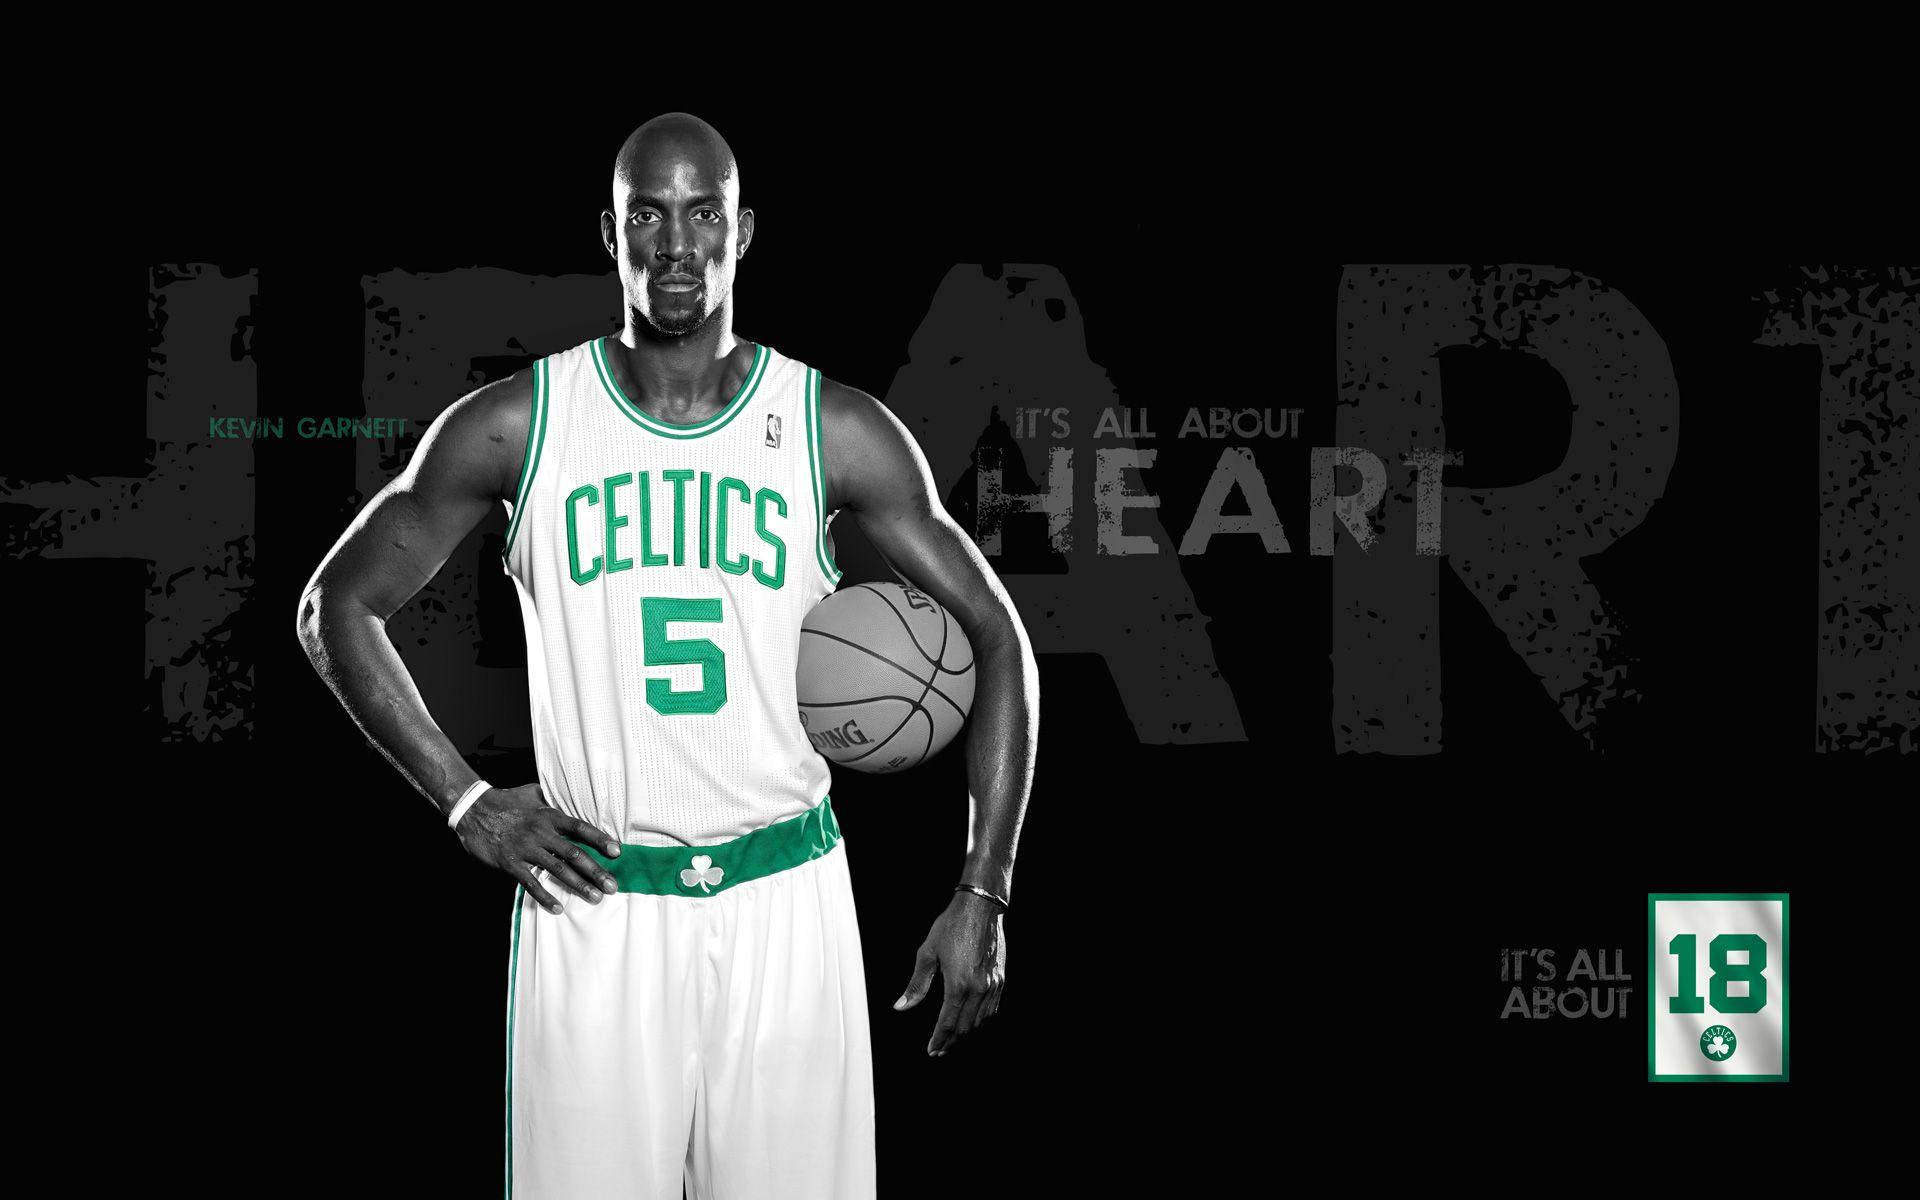 Kevin Garnett It's All About Heart Background